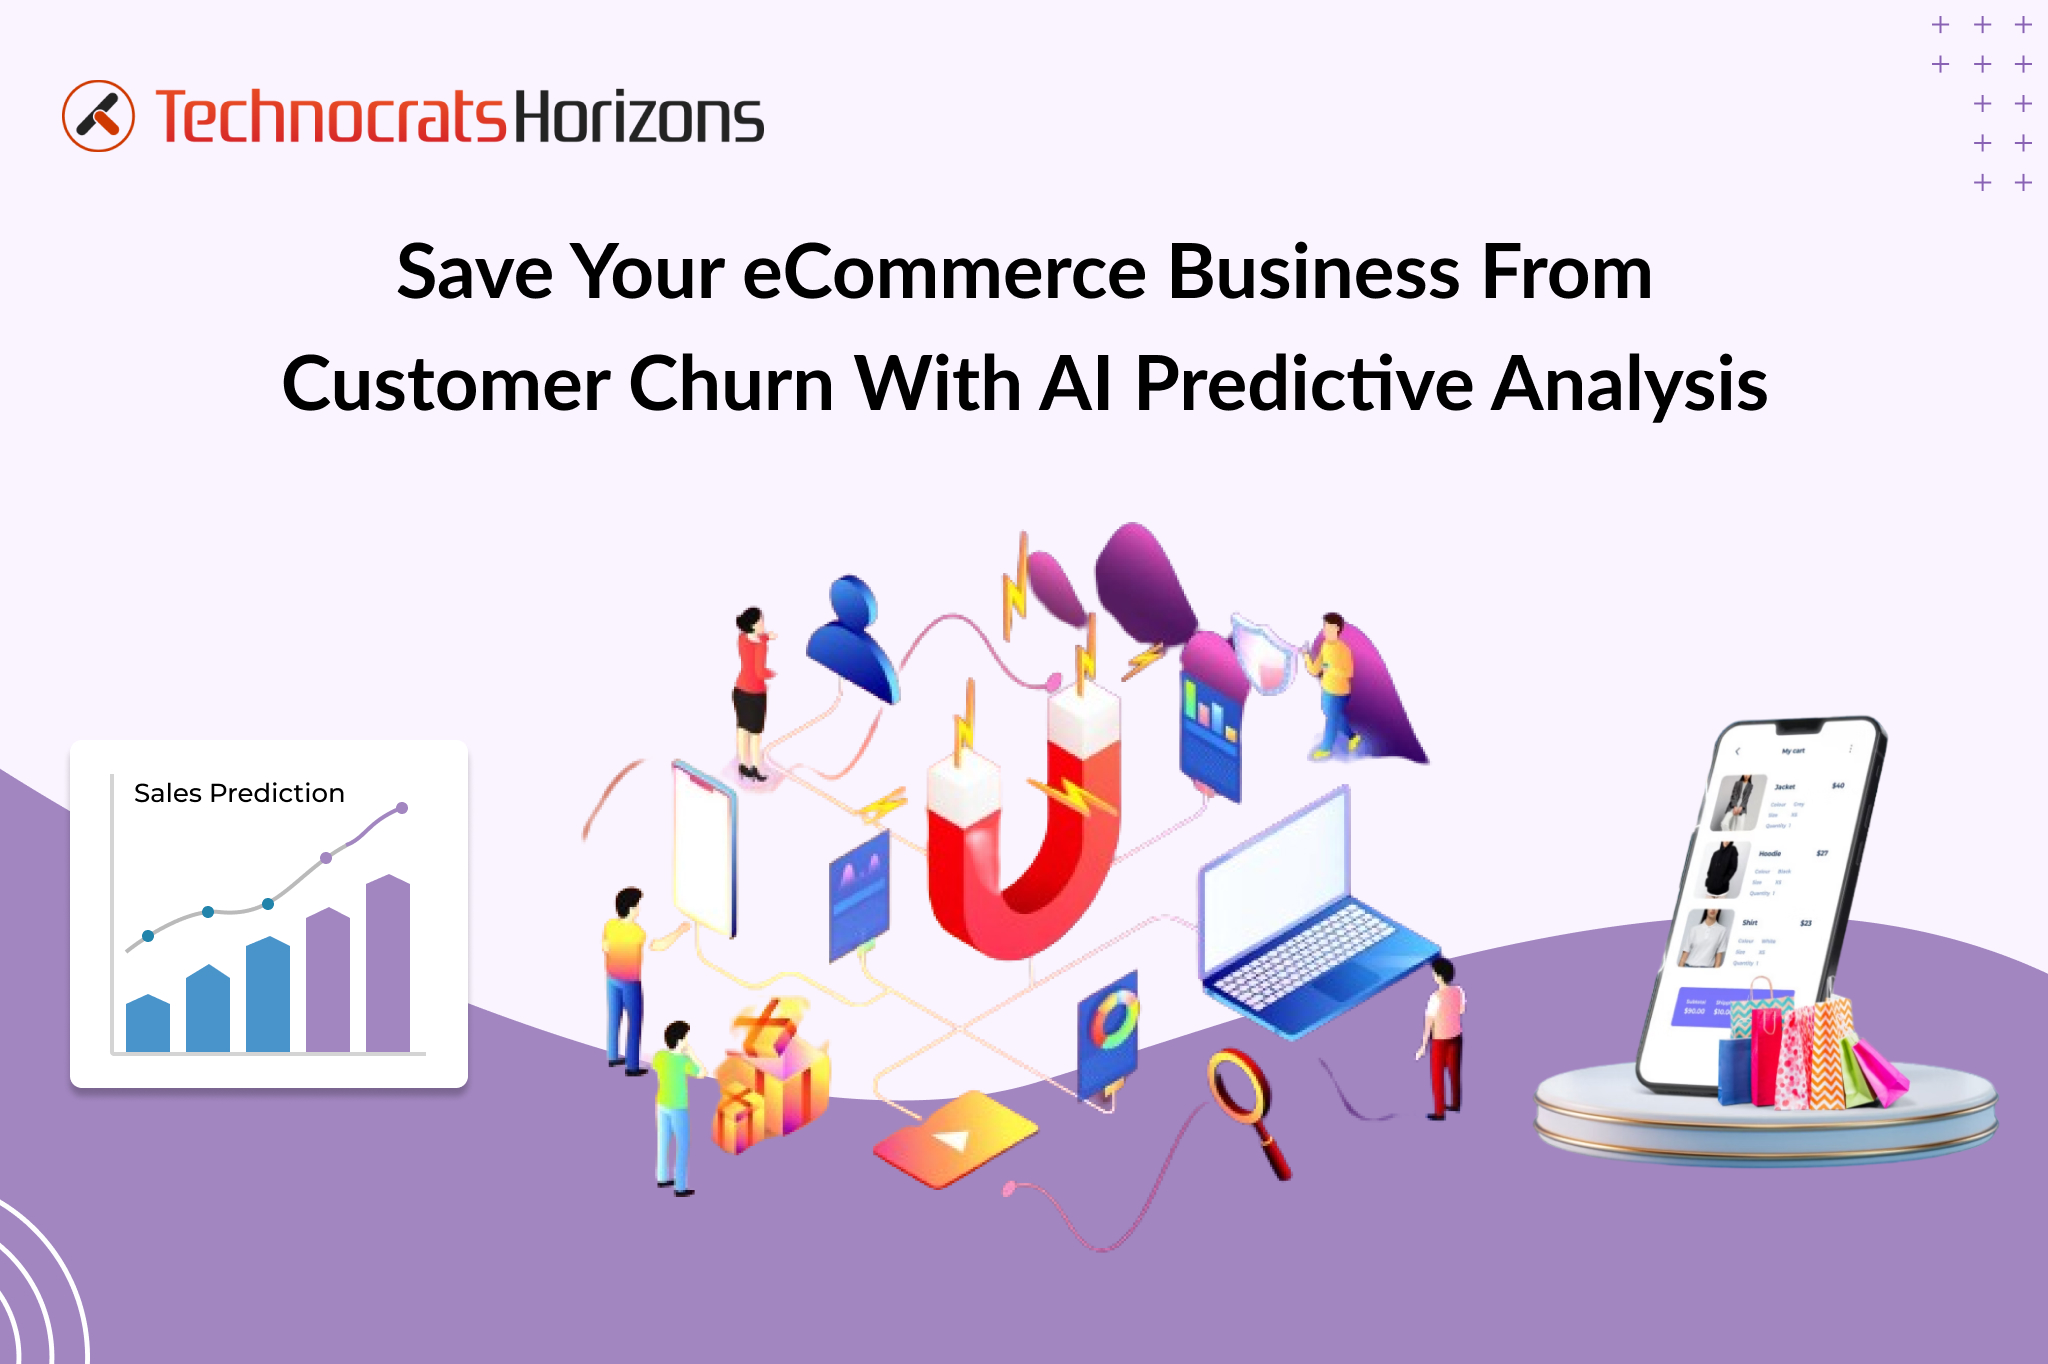 How the eCommerce Industry Can Predict Customer Churn with AI